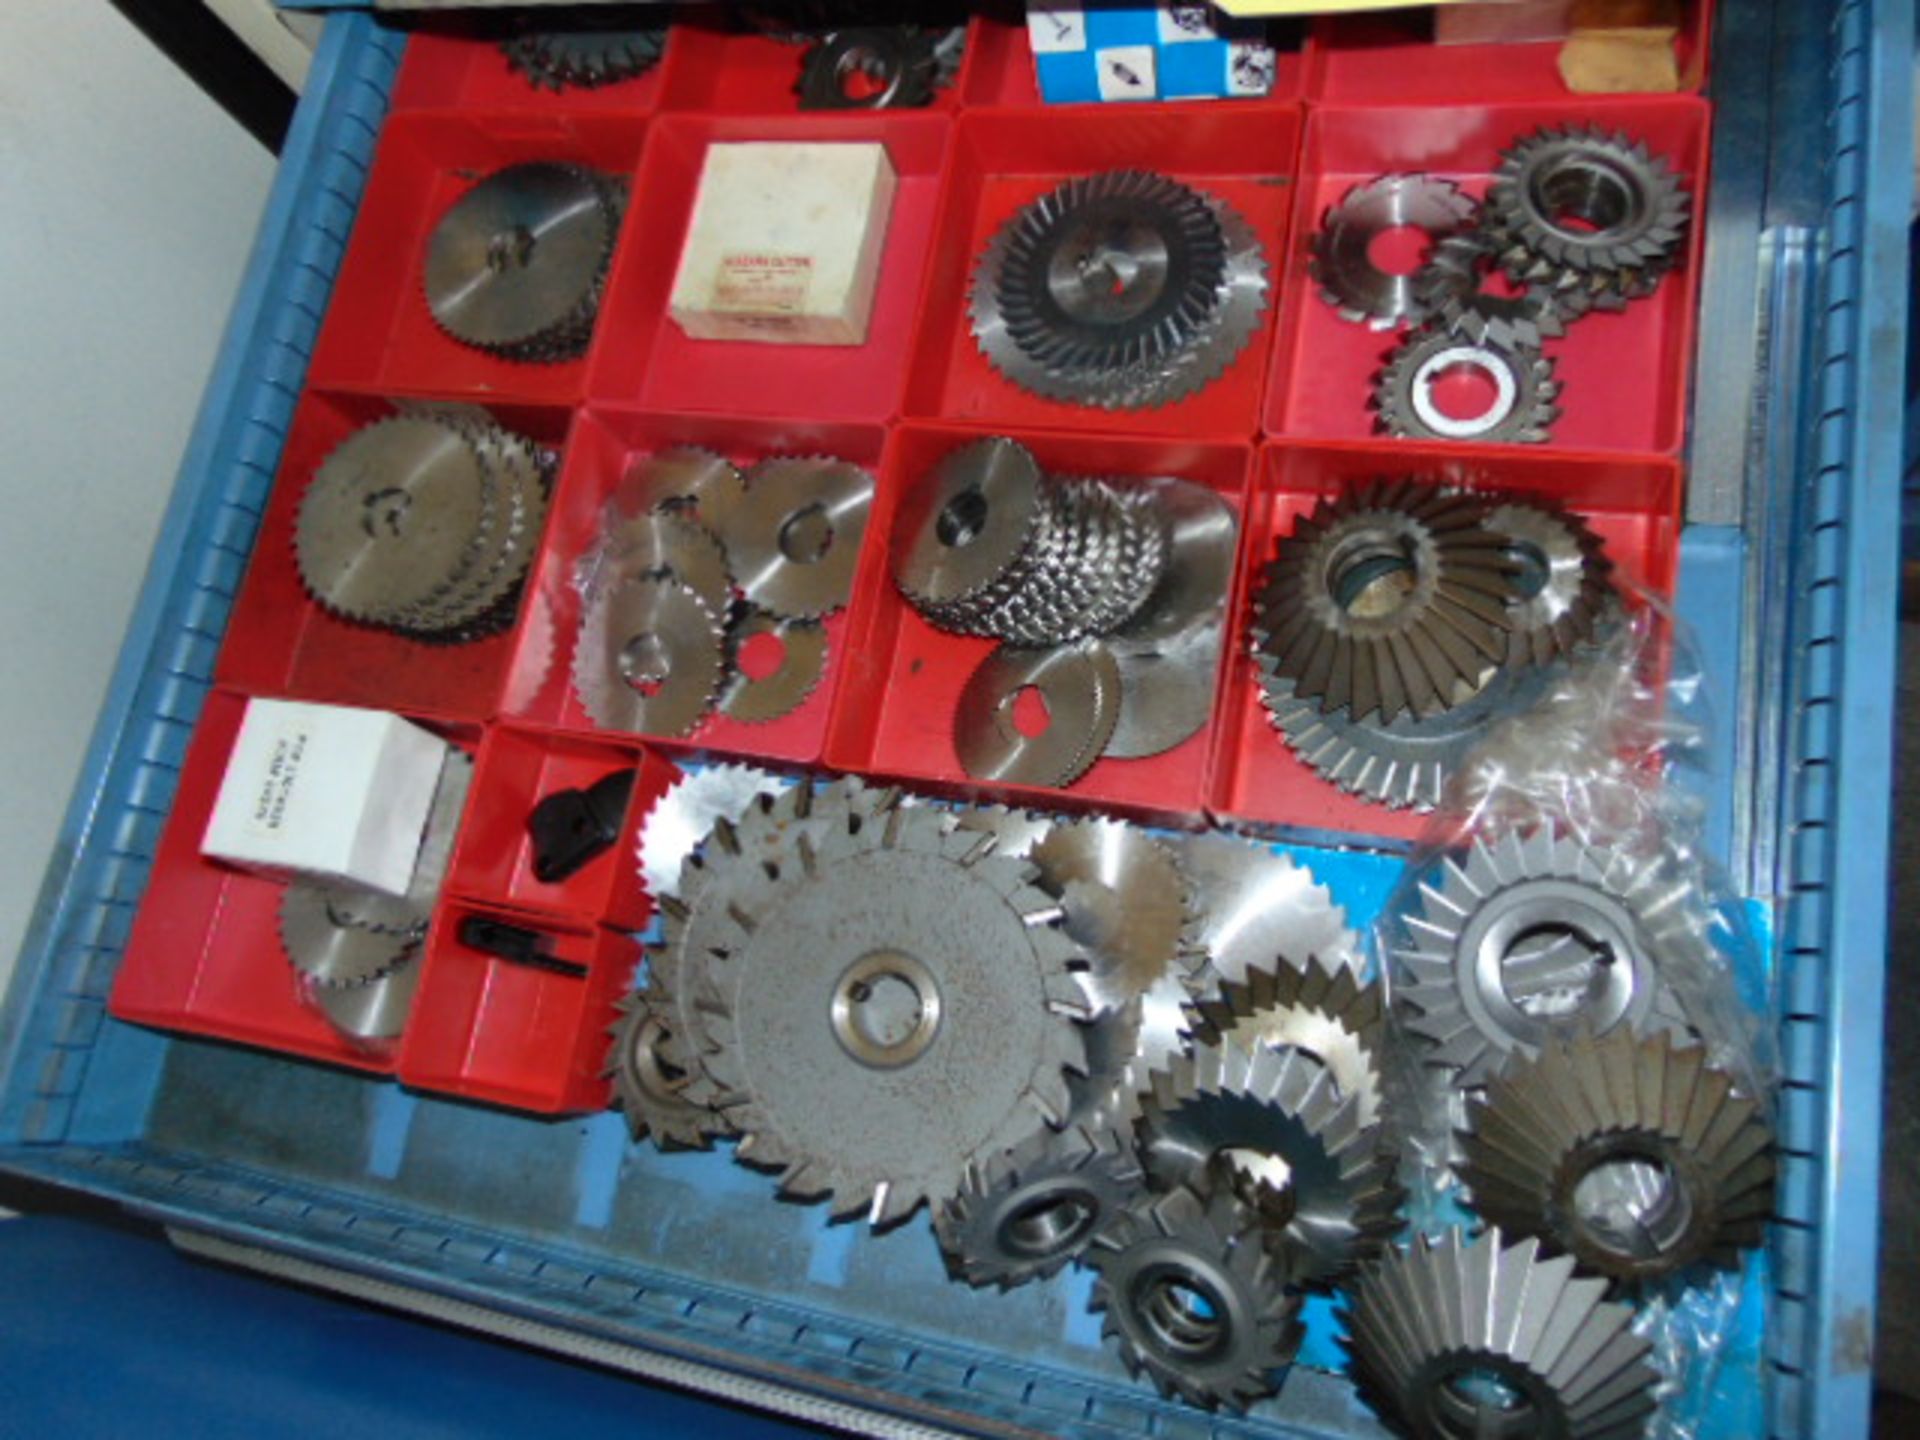 LOT OF MILLING CUTTERS, assorted (in one drawer)